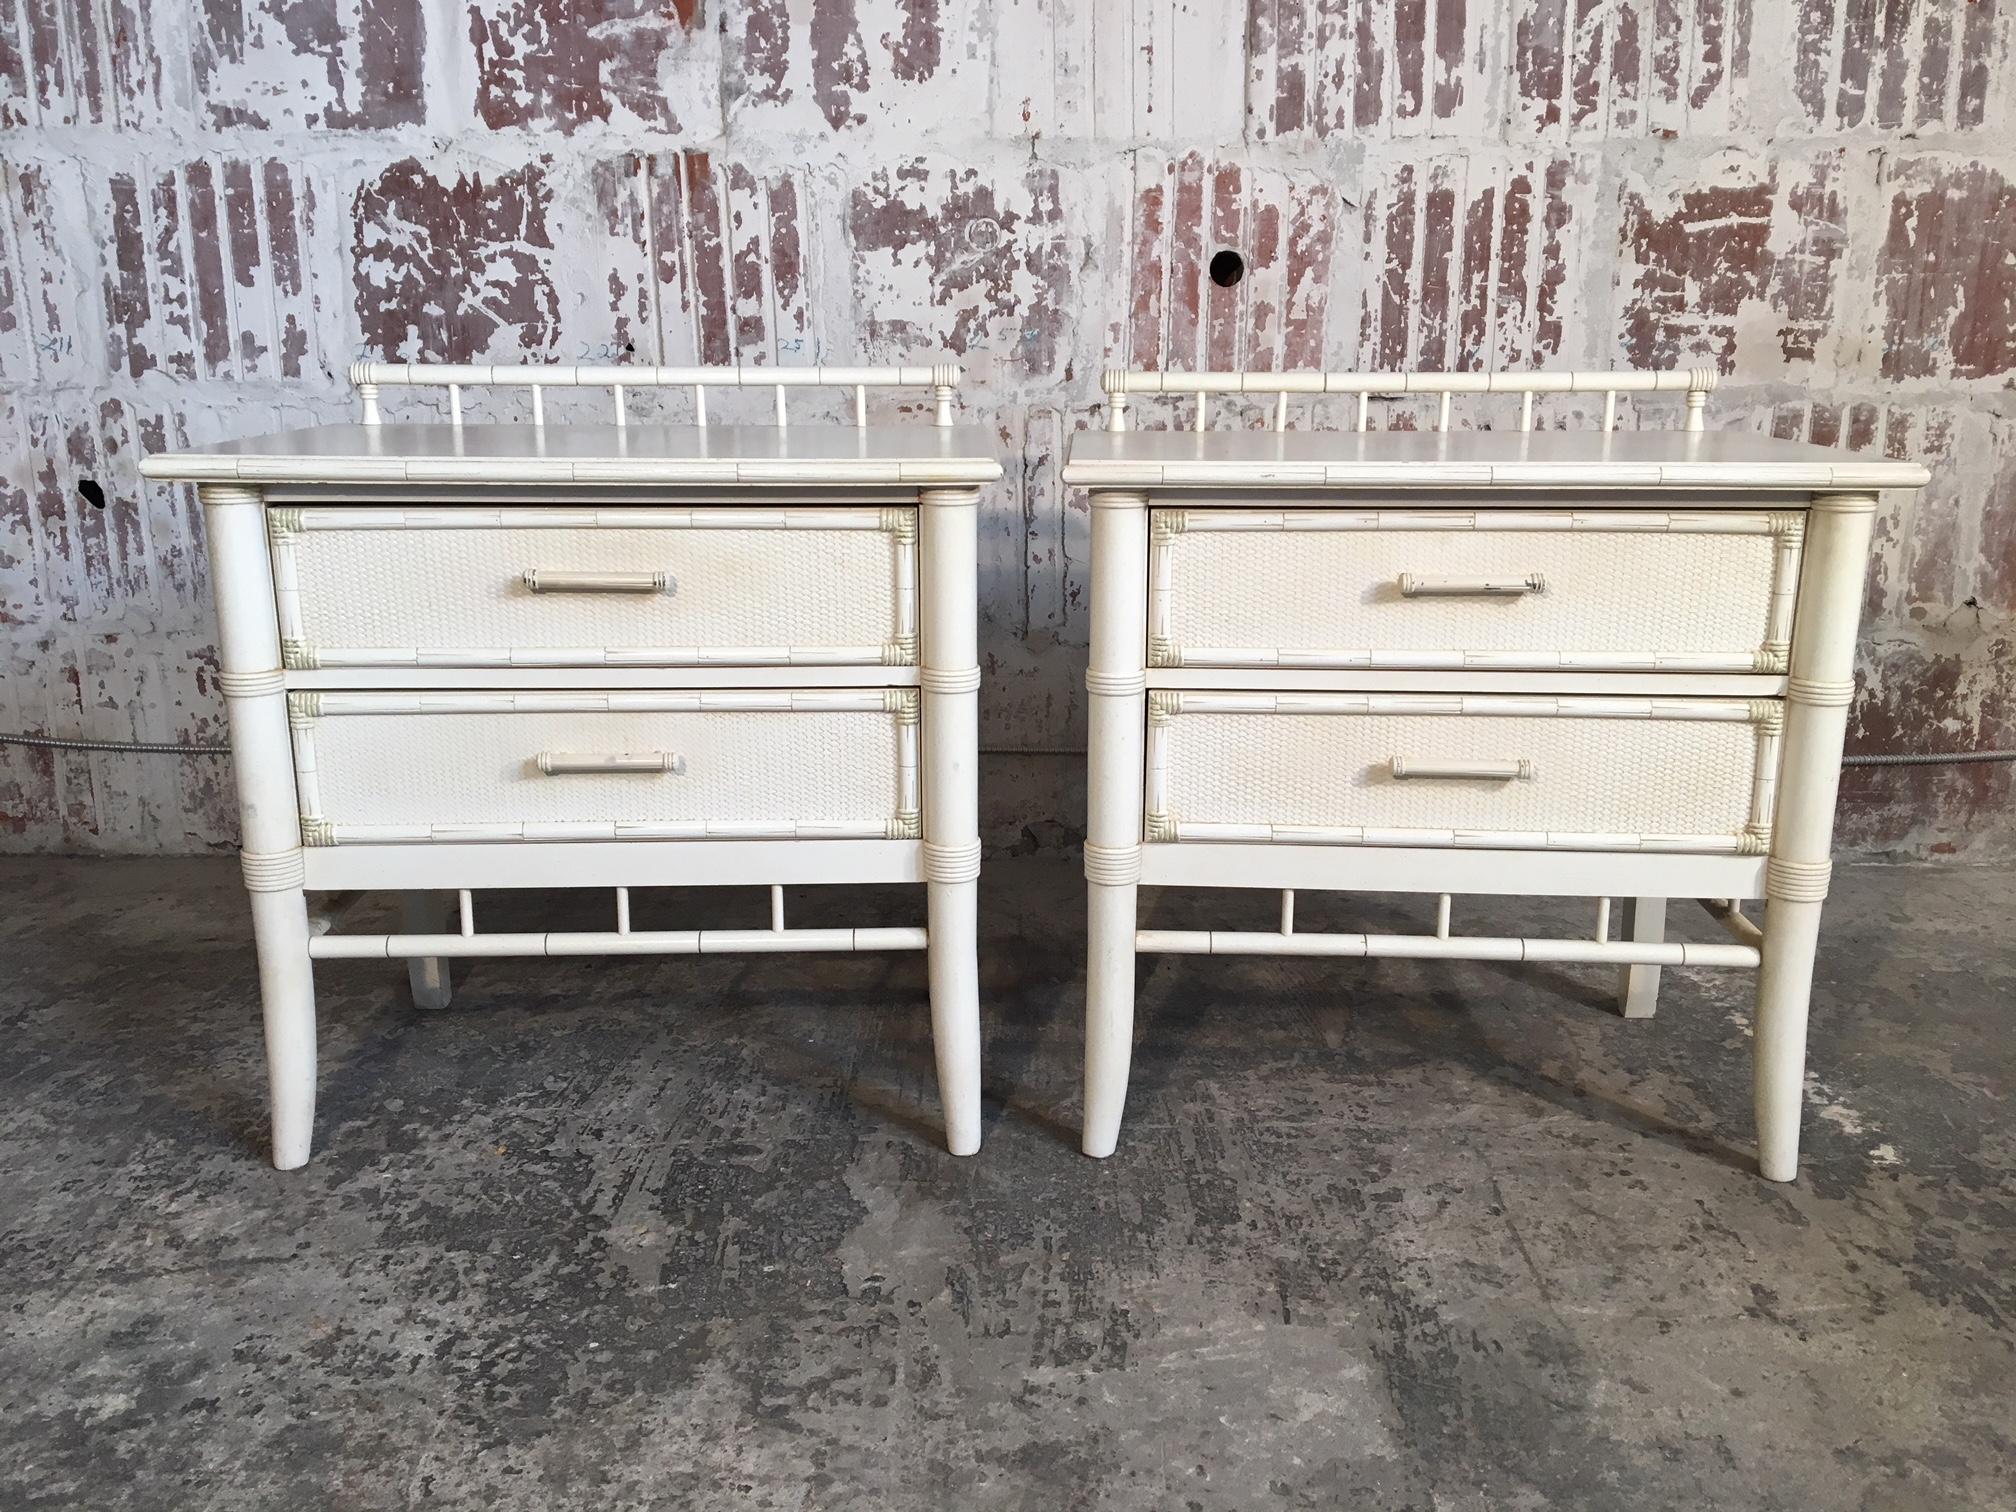 Pair of Thomasville faux bamboo nightstands in original white finish. Decorative gate detail along top, circa 1976. Excellent vintage condition with very minor signs of age appropriate wear.